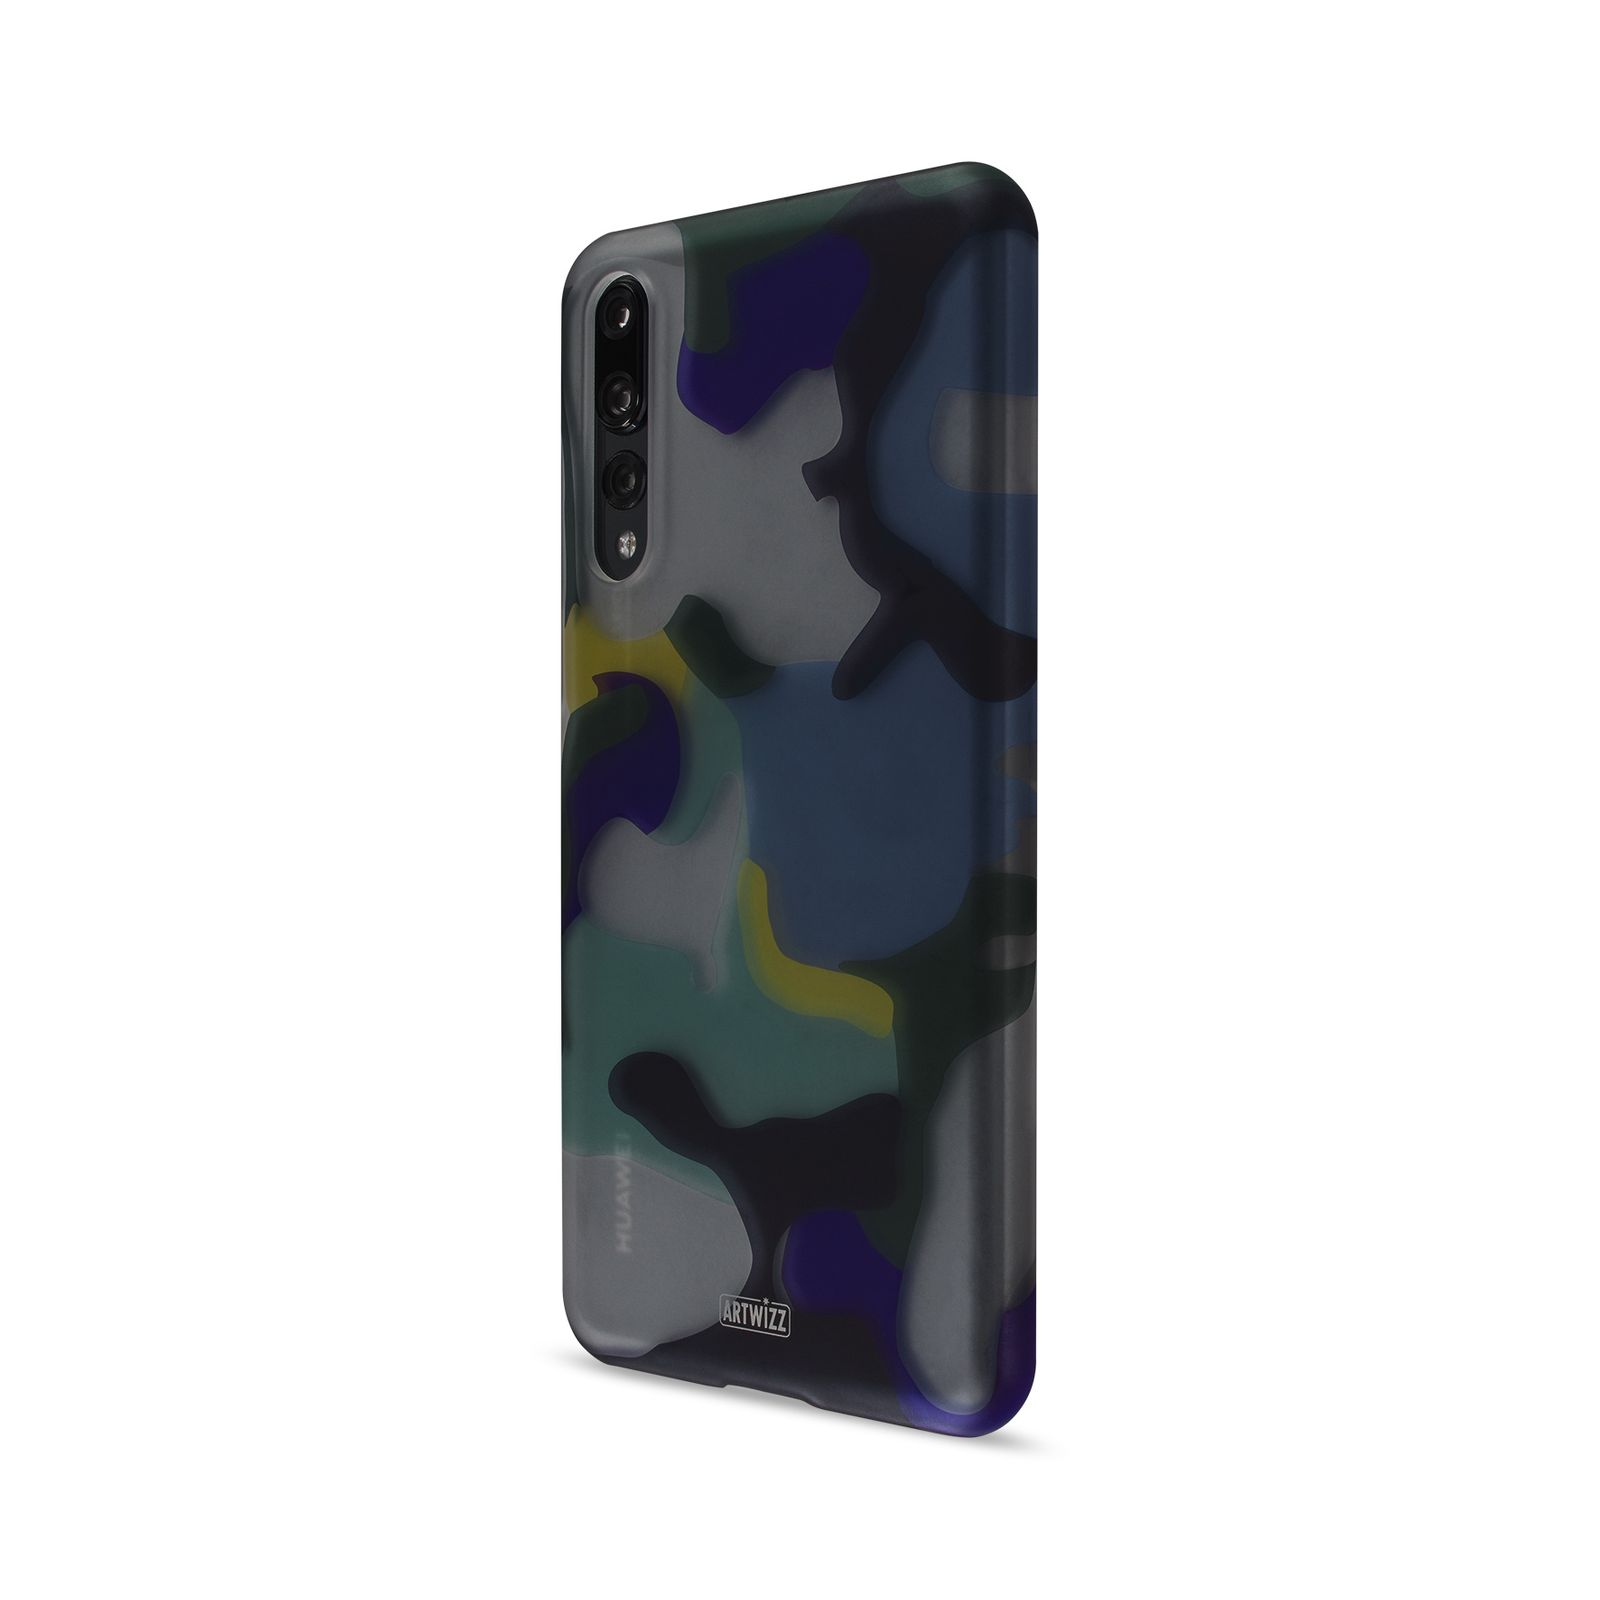 Backcover, HUAWEI, Camouflage Ocean Pro, P20 Clip, ARTWIZZ